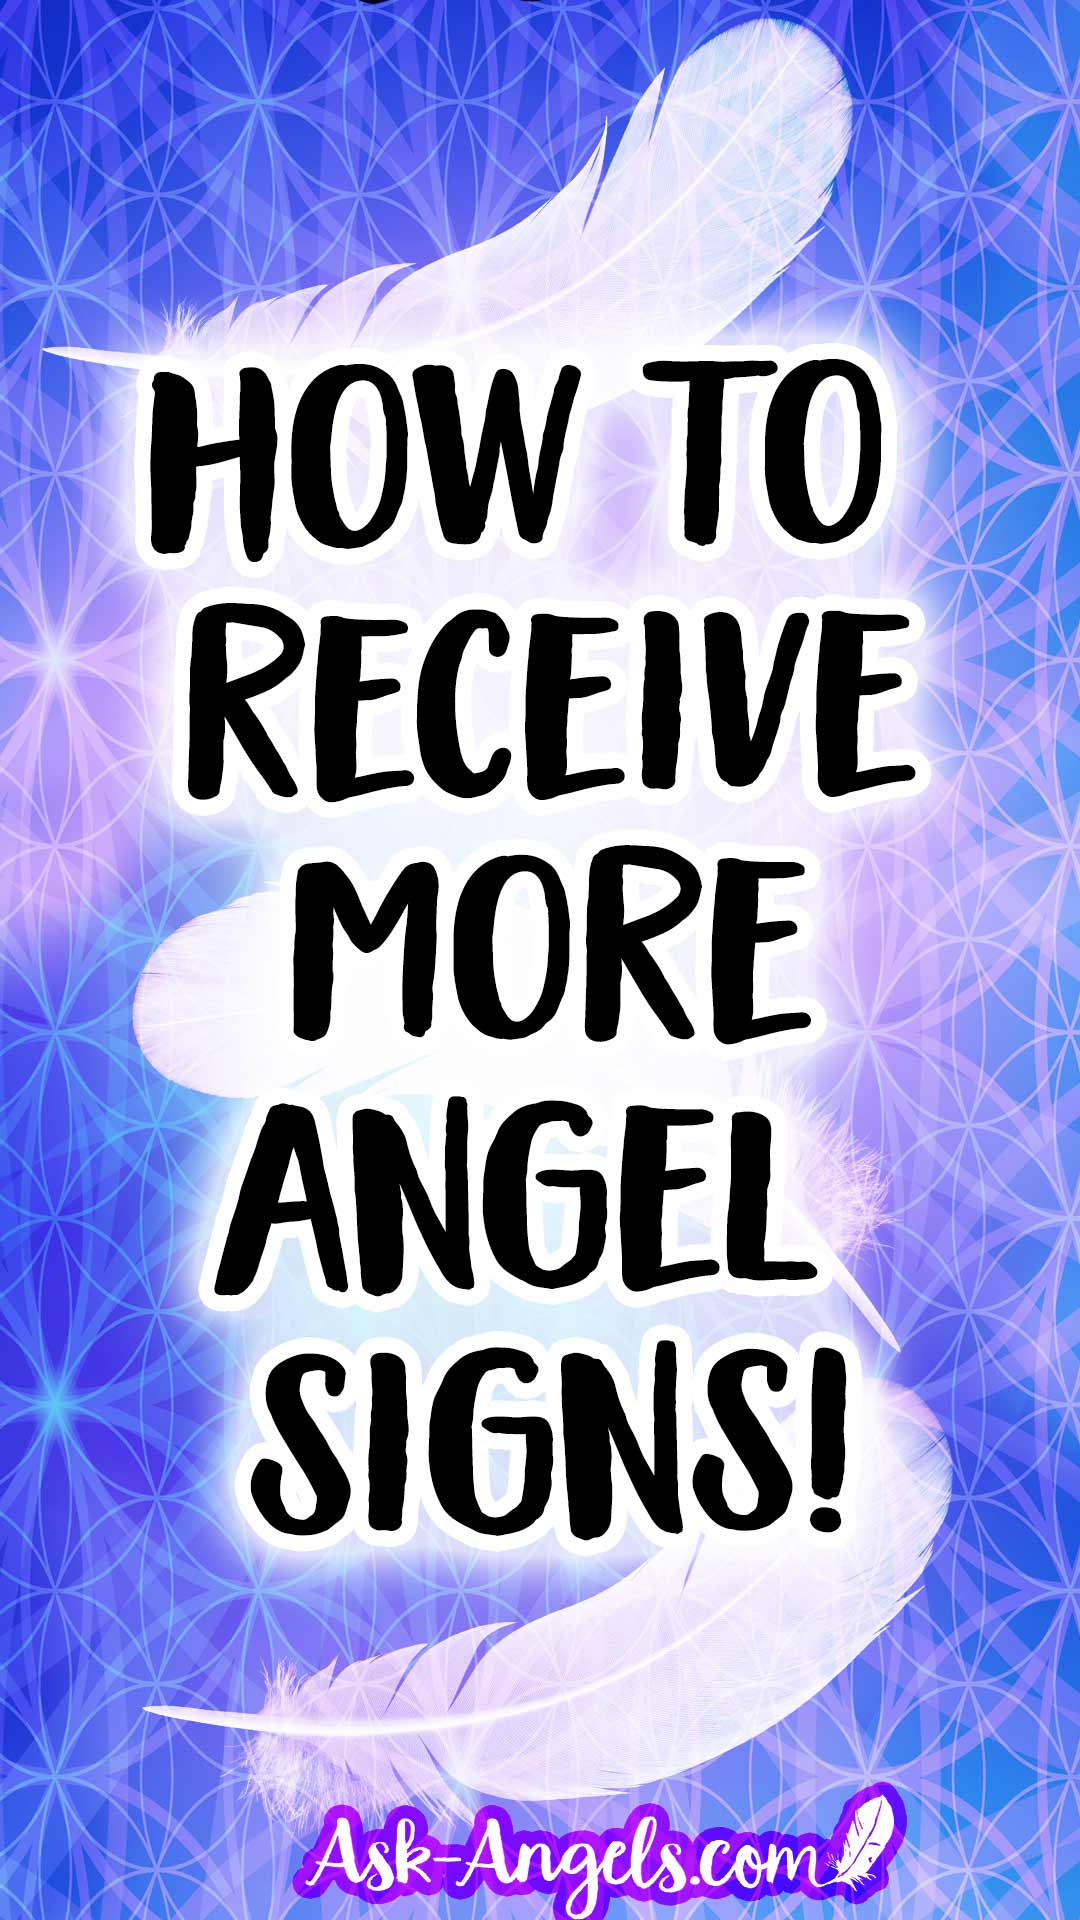 How to Receive More Angel Signs